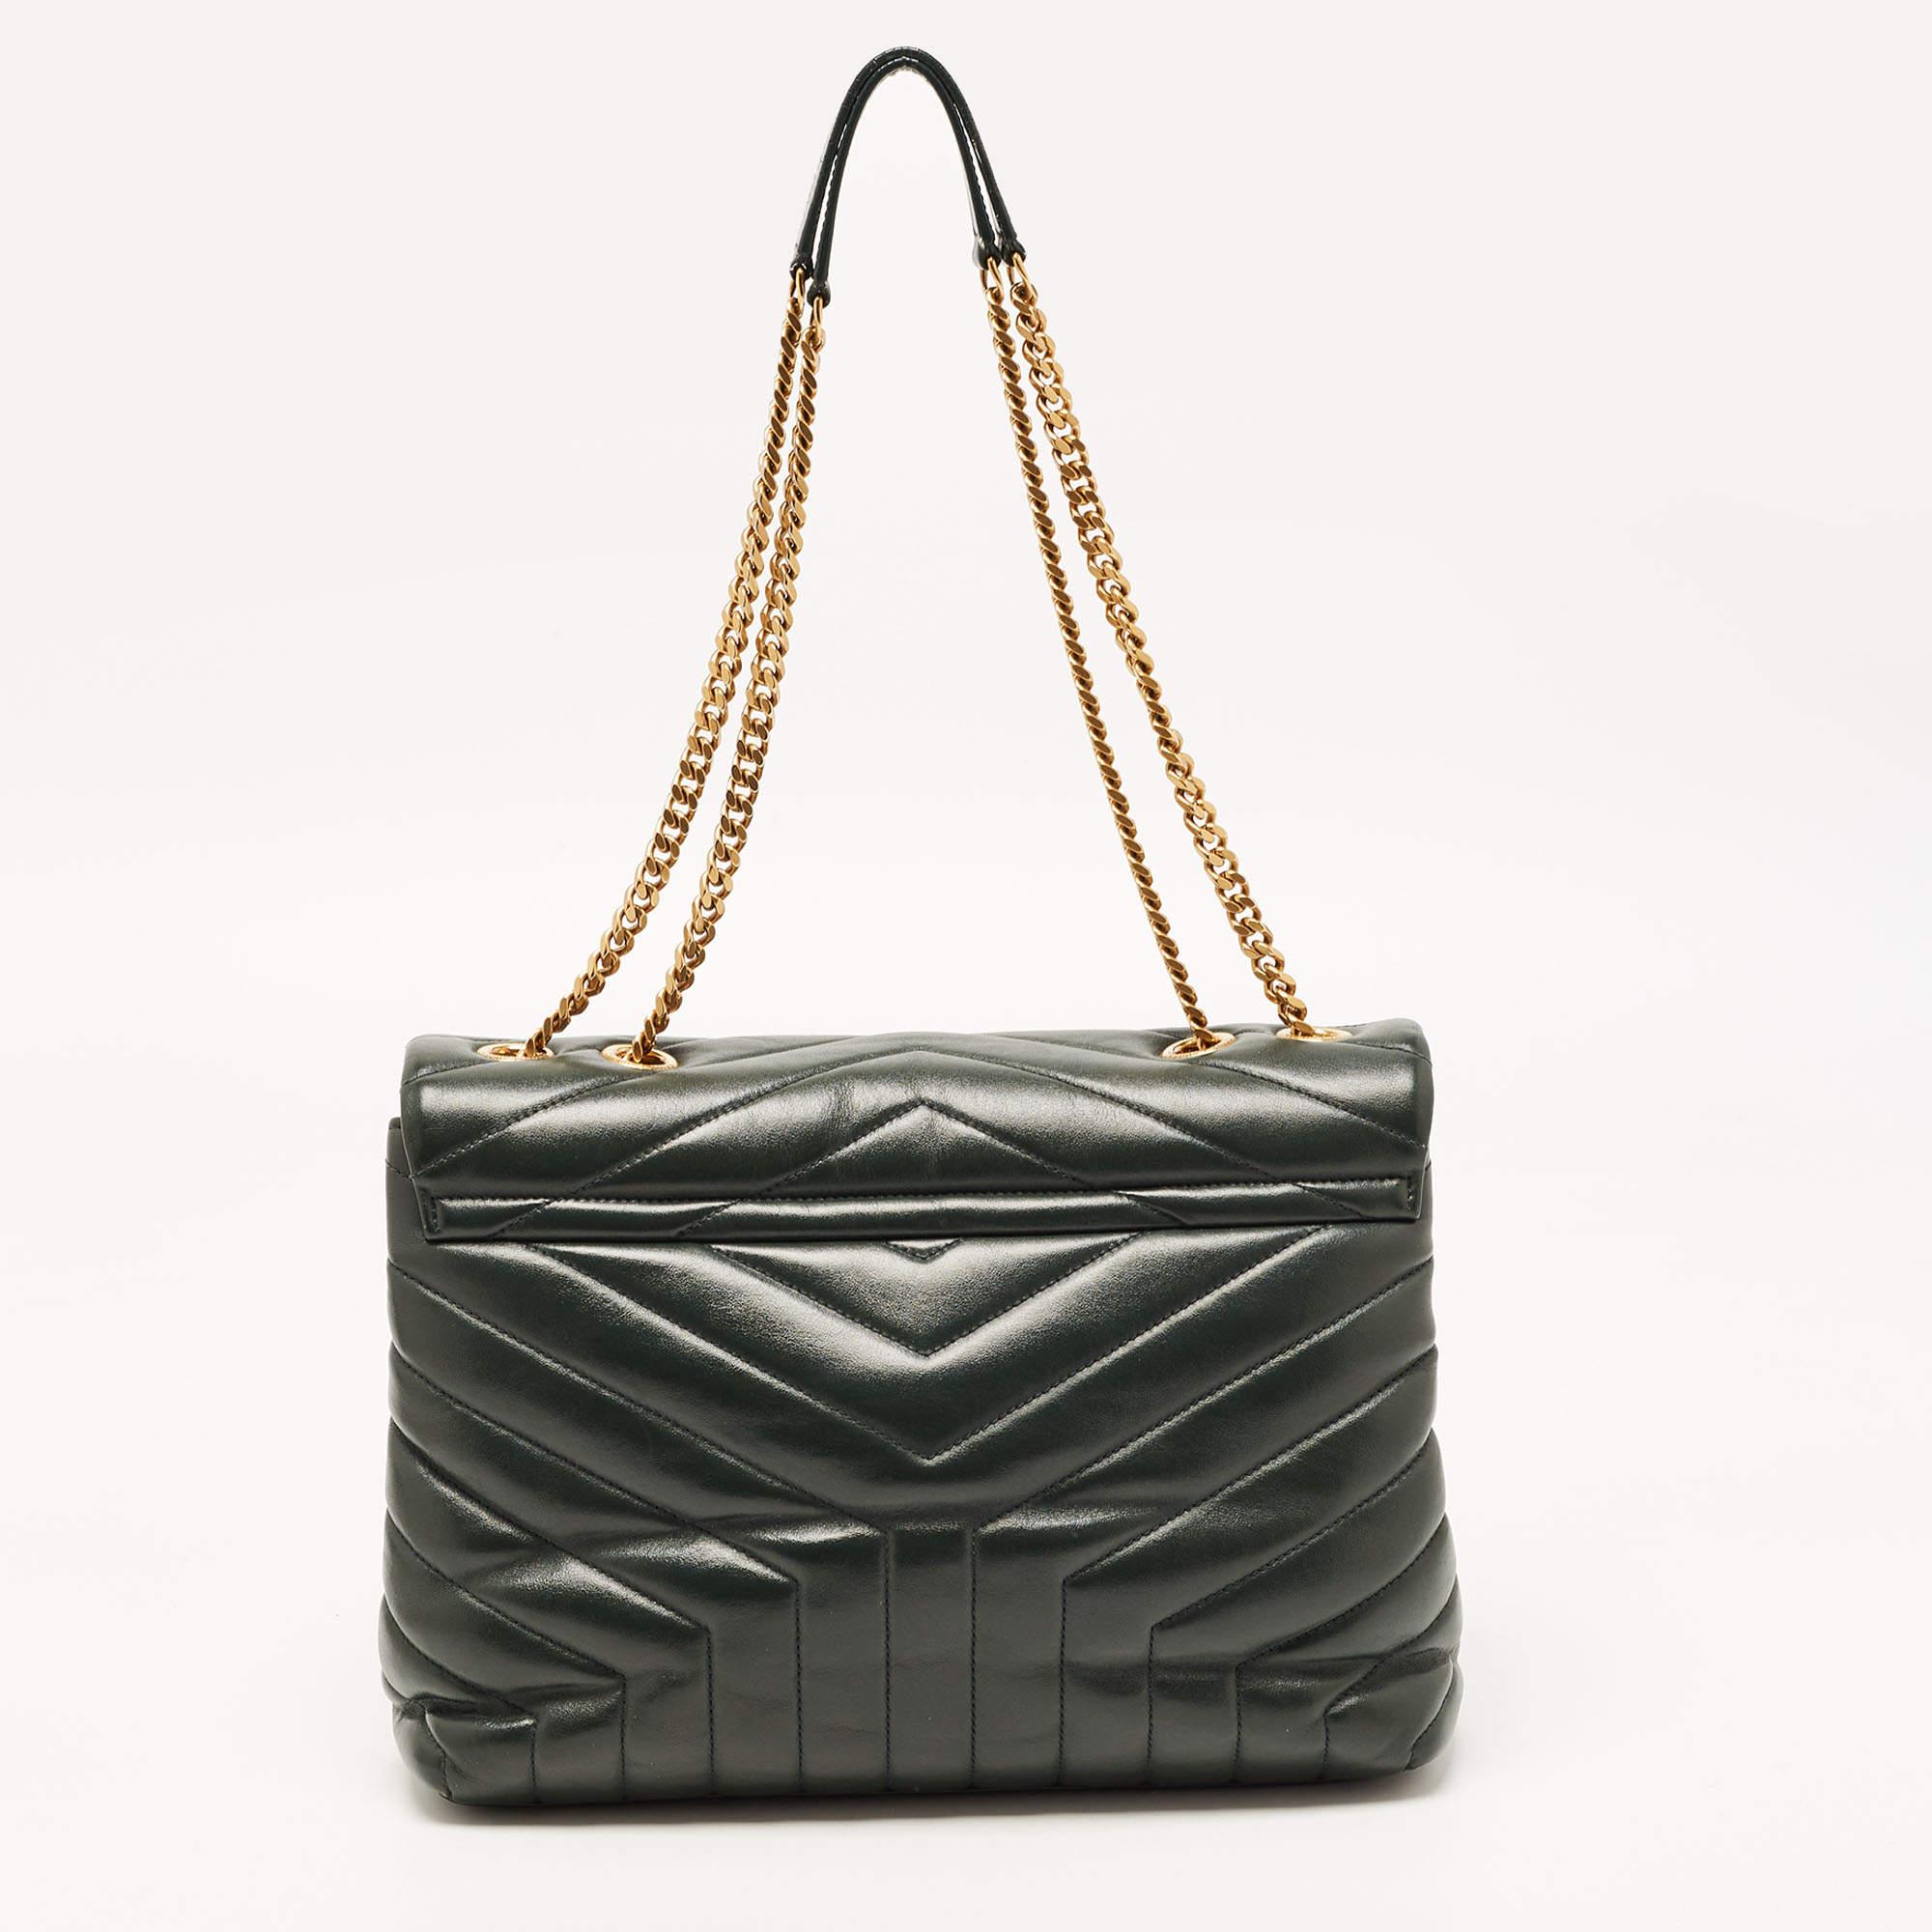 The fashion house’s tradition of excellence, coupled with modern design sensibilities, works to make this YSL Loulou bag one of a kind. It's a fabulous accessory for everyday use.

Includes: Original Dustbag
